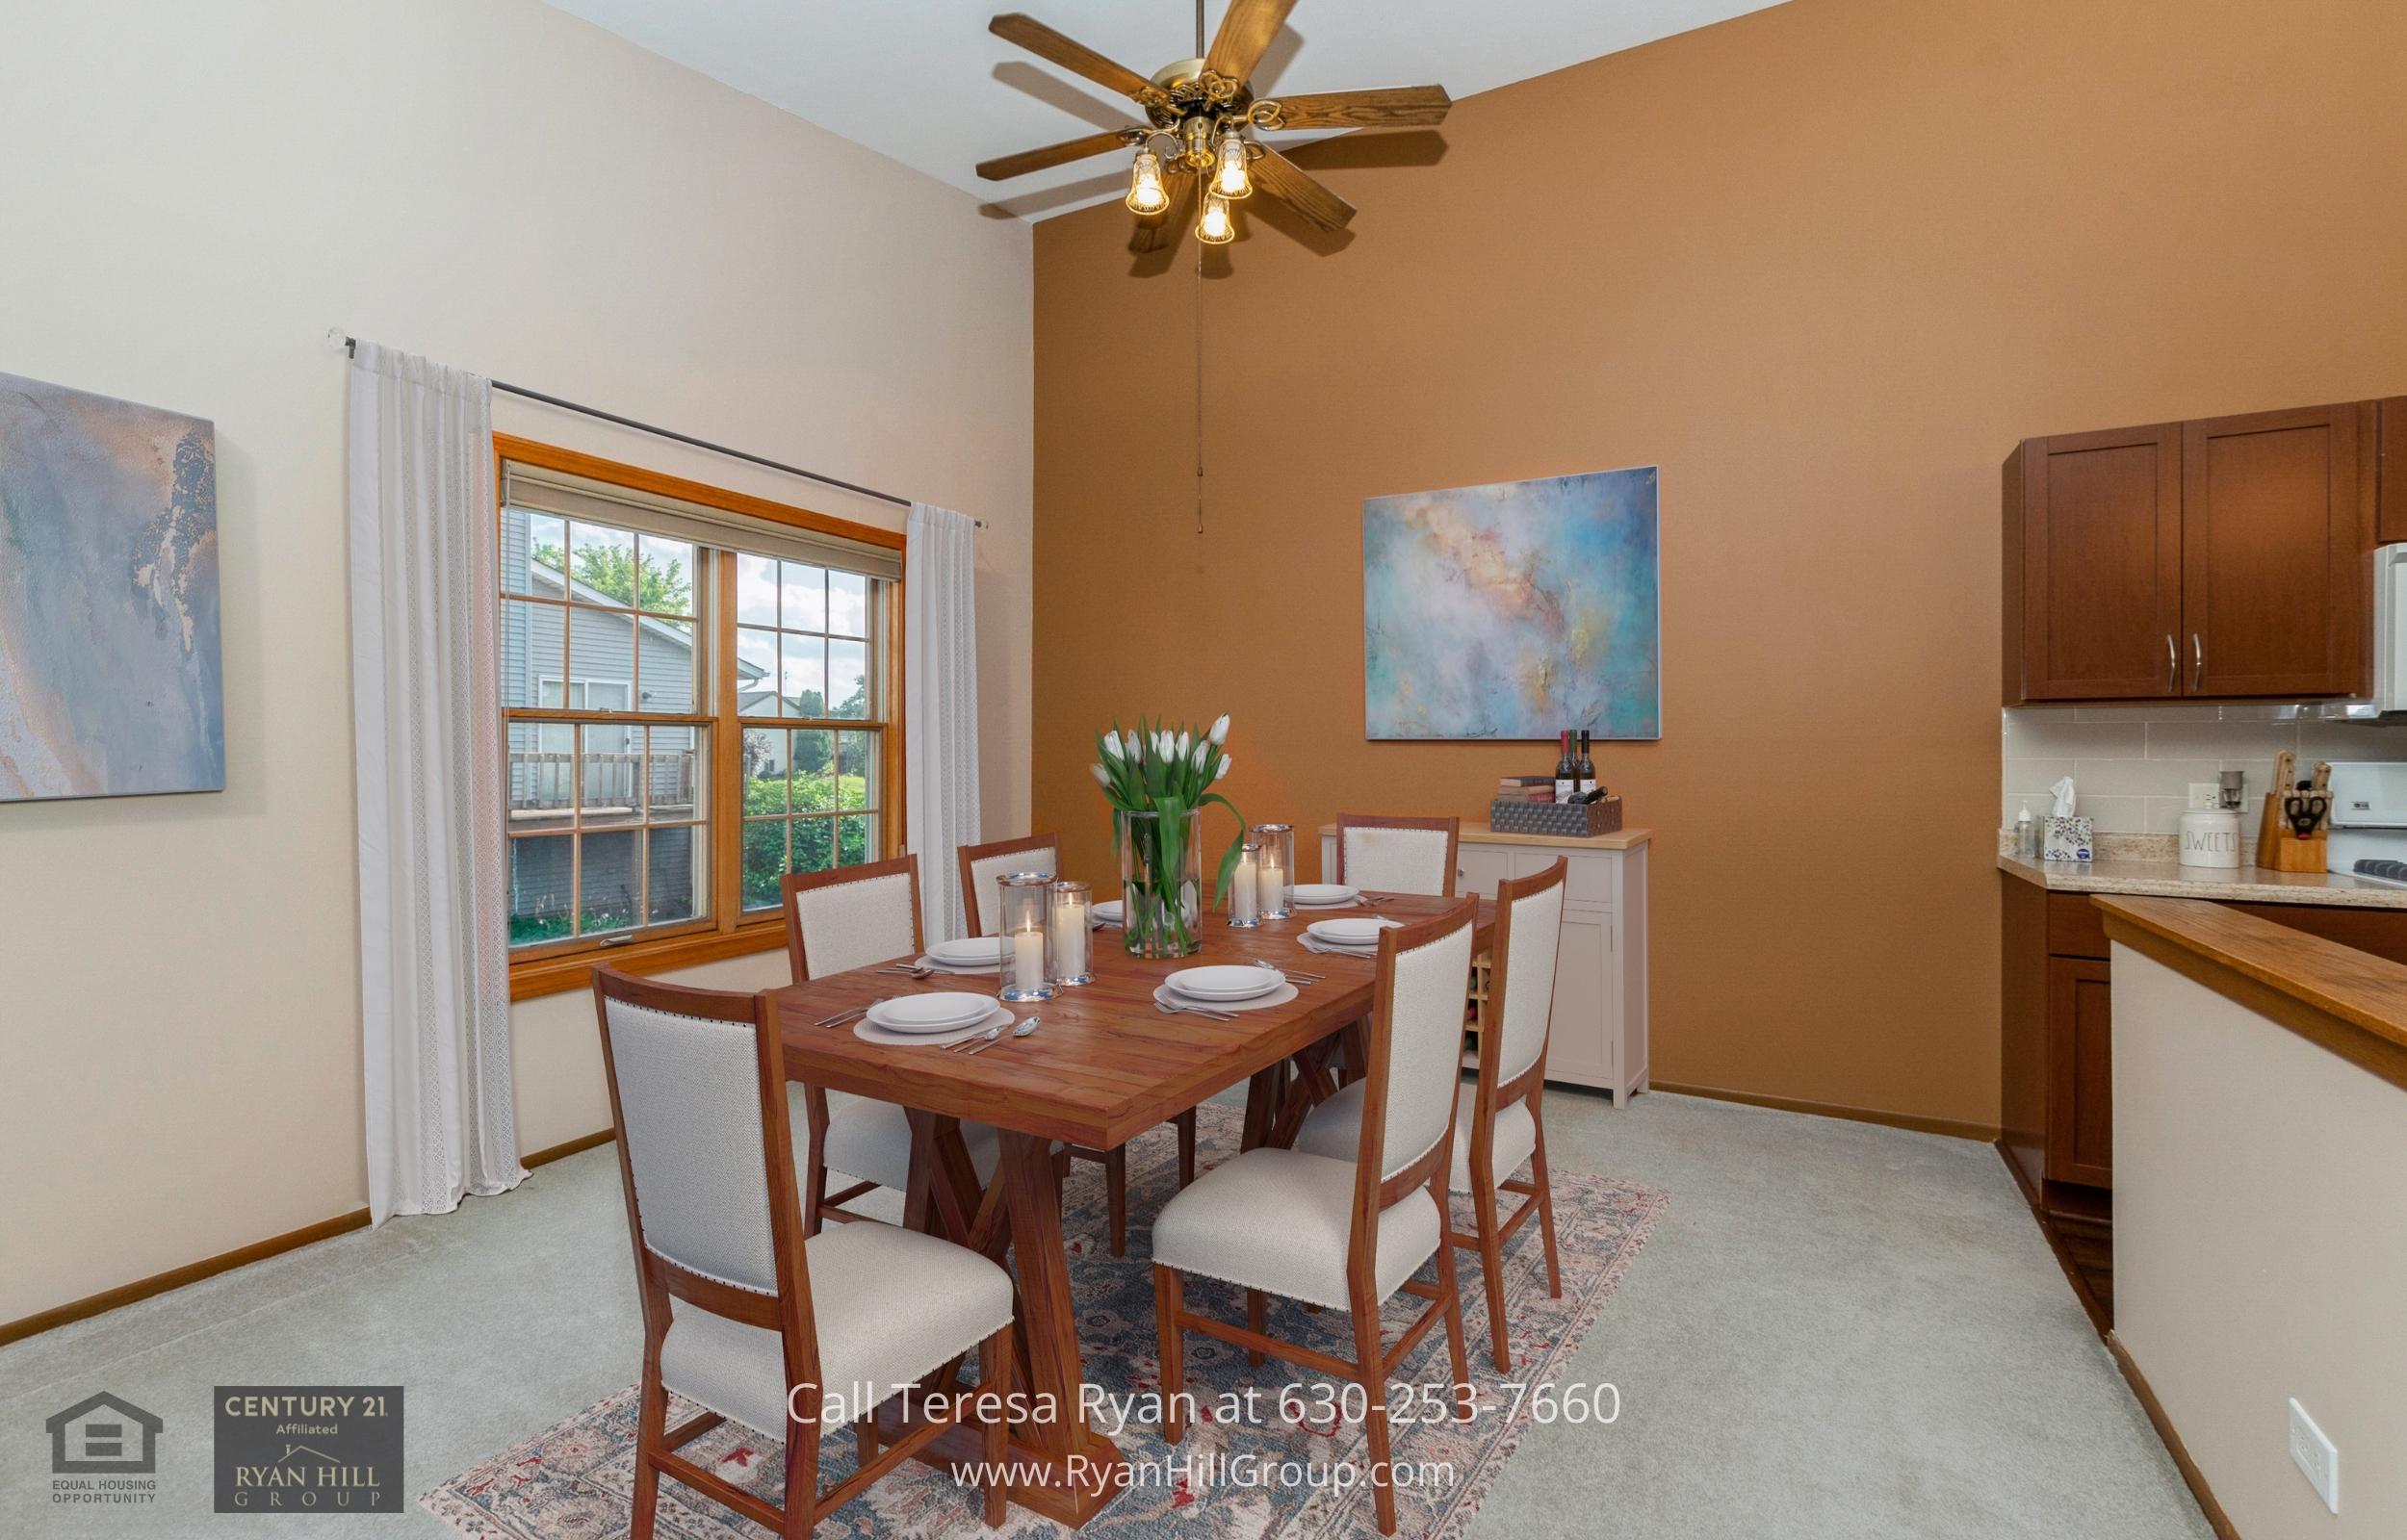 Enjoy meals with friends and family in the ample-spaced dining area of this Frankfort, IL home for sale.